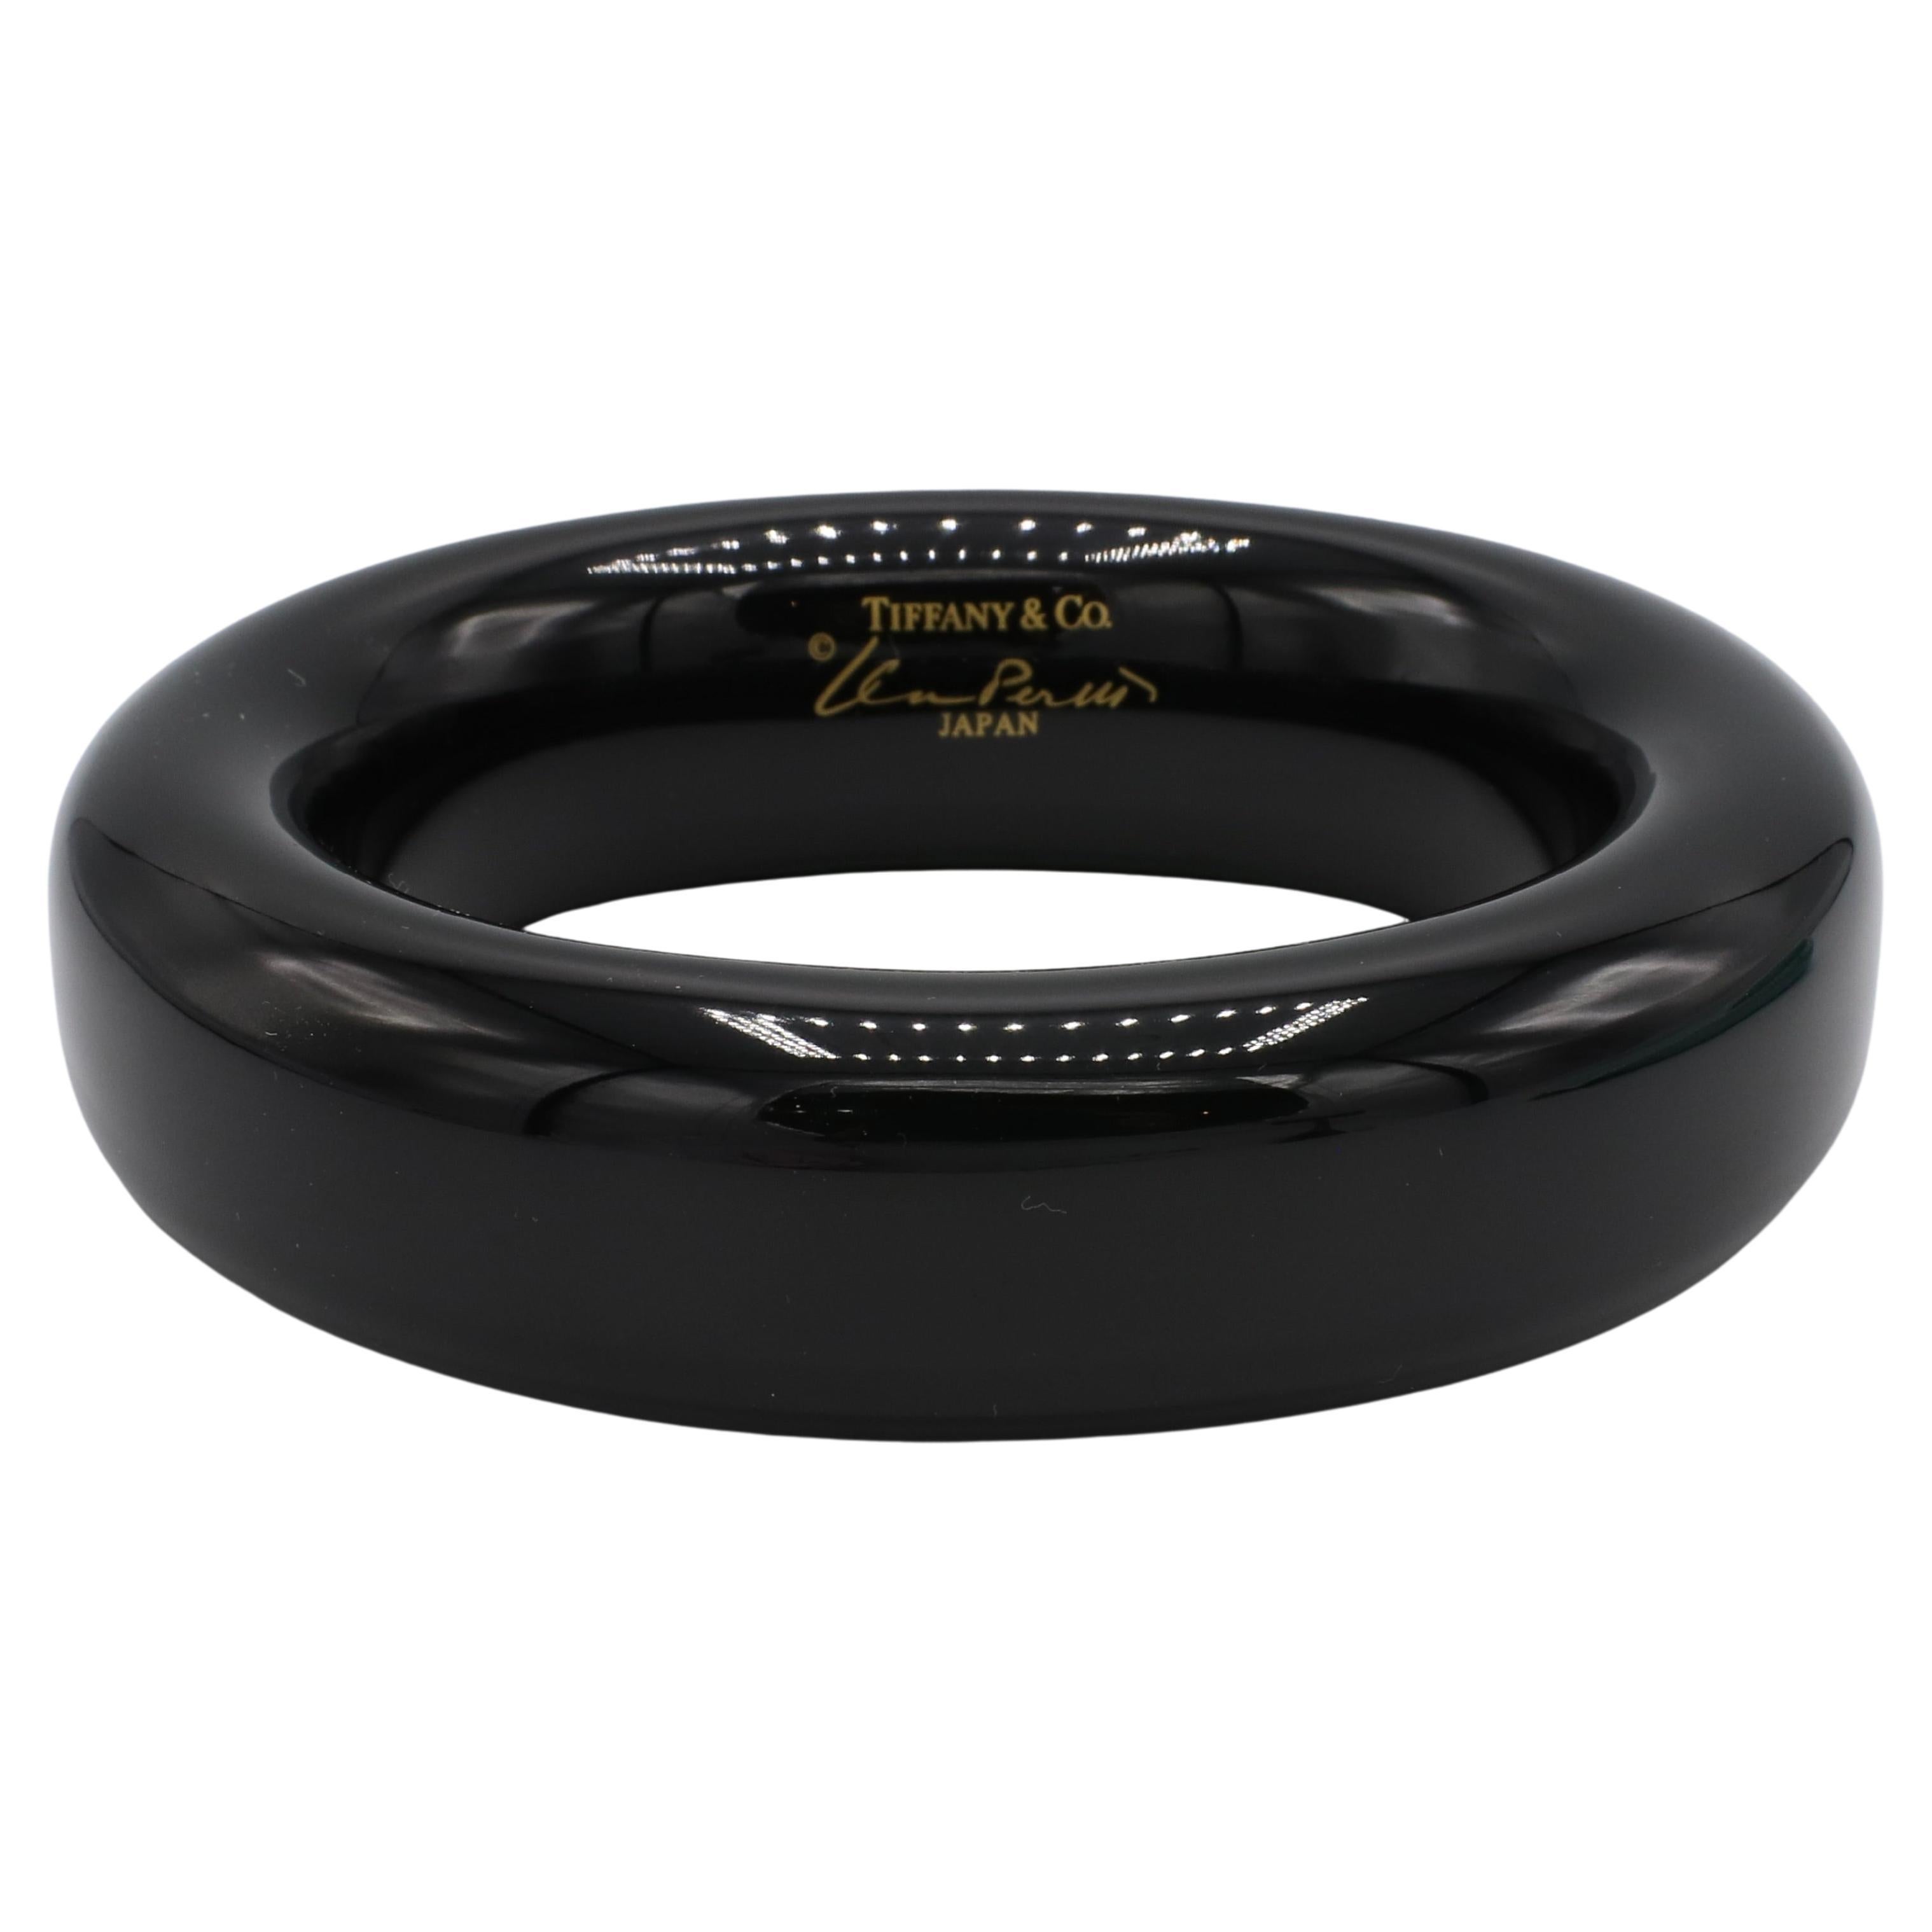 Tiffany & Co. Elsa Peretti Black Lacquer Bangle Bracelet
Material: Black lacquer over Japanese hardwood
Weight: 40.7 grams
Width: 23mm
Inner Circumference: 7.5 inches
Signed: Tiffany & Co. ©Elsa Peretti JAPAN
Retail: $725 USD
